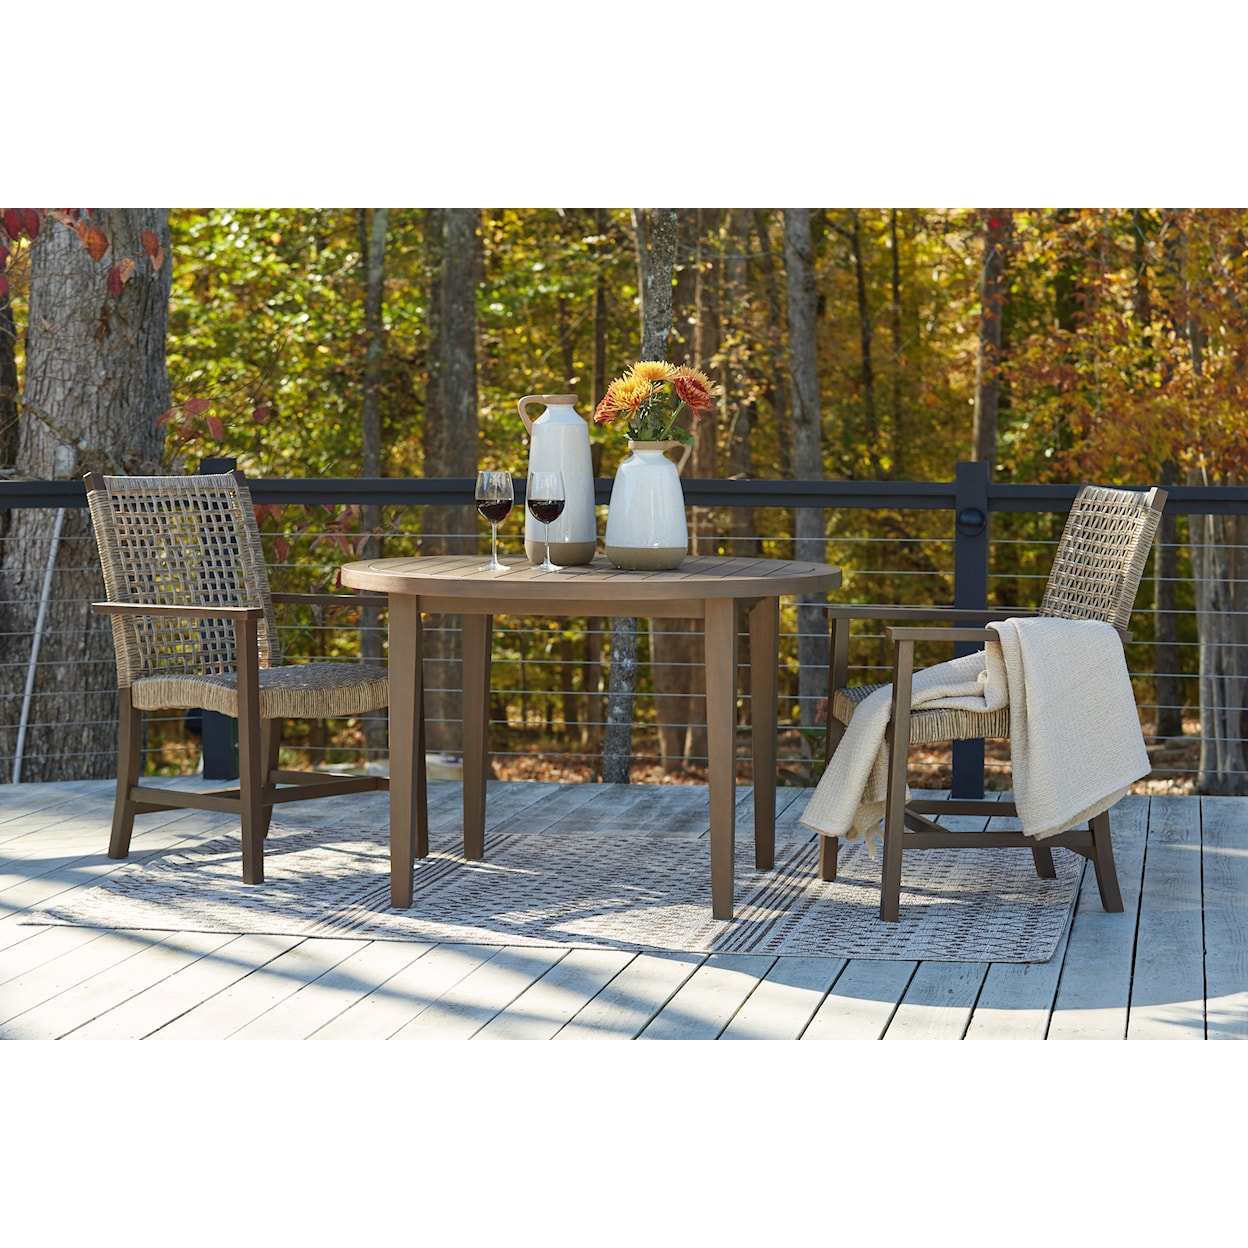 Ashley Signature Design Germalia Outdoor Dining Table and 2 Chairs